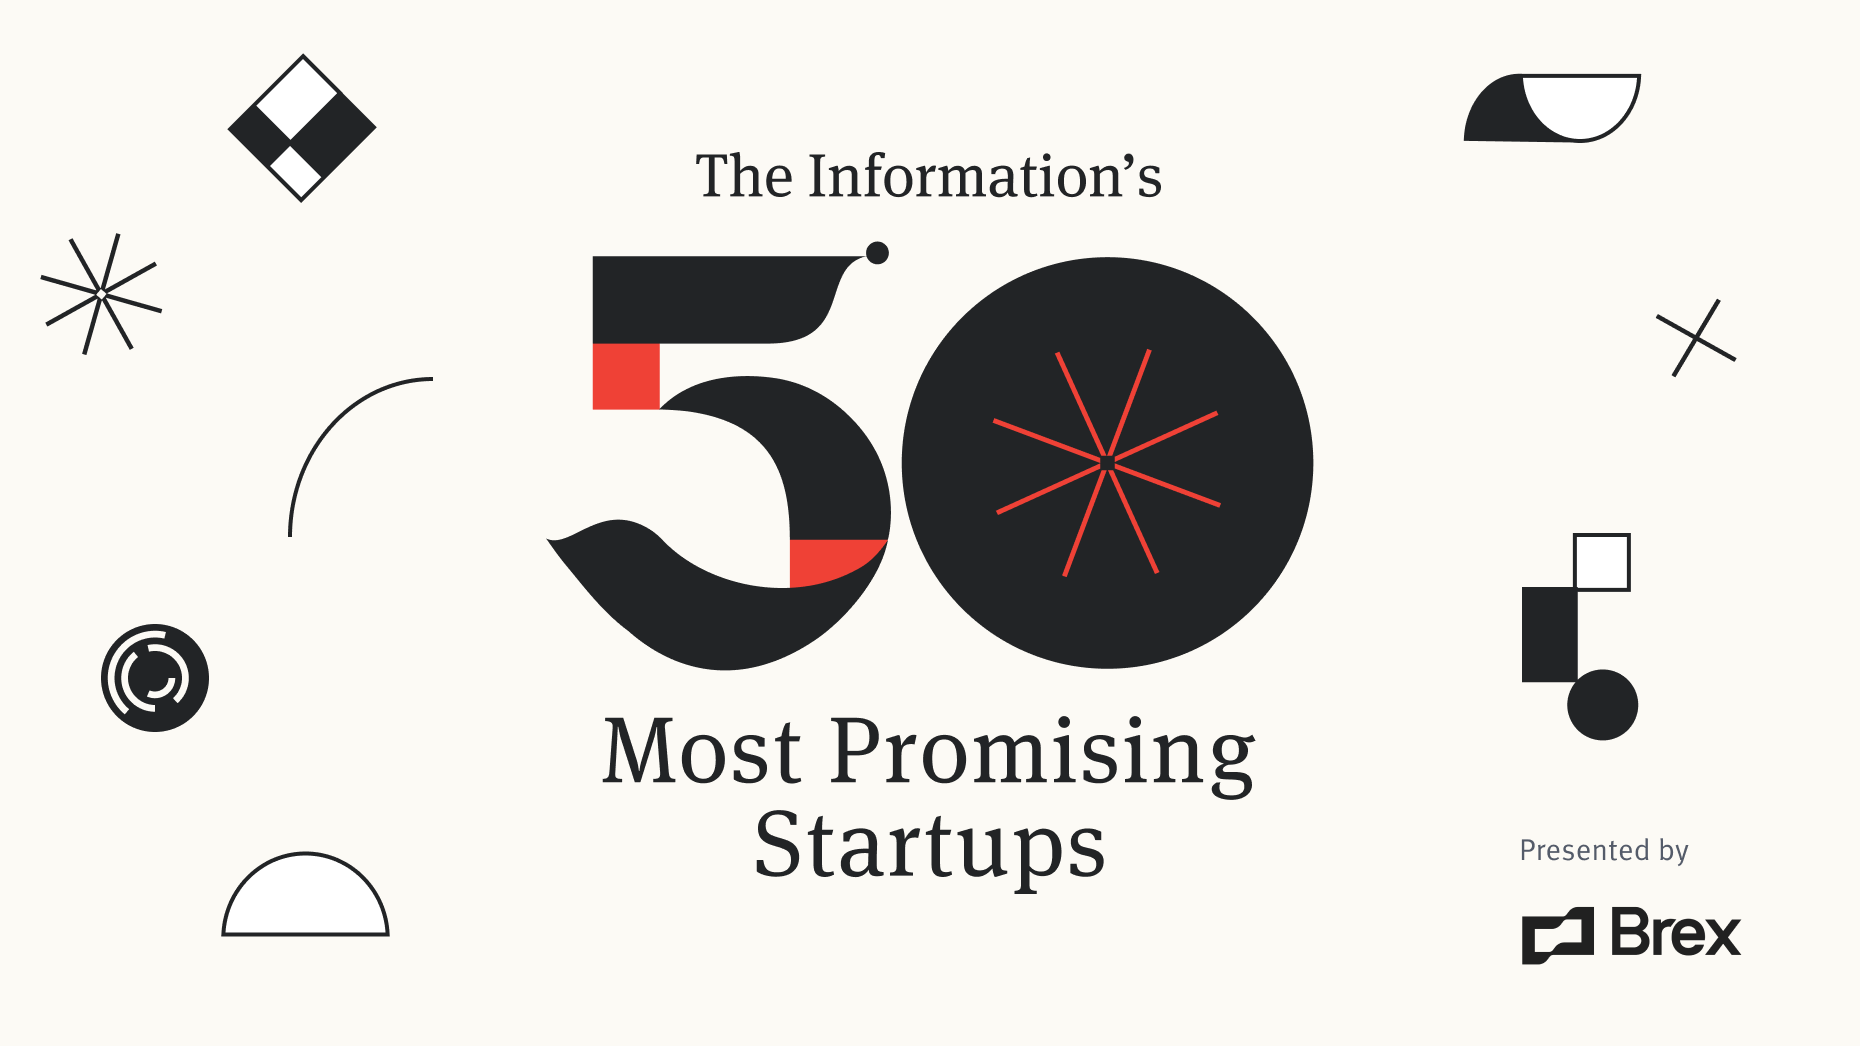 Inside The Information’s 50 Most Promising Startups